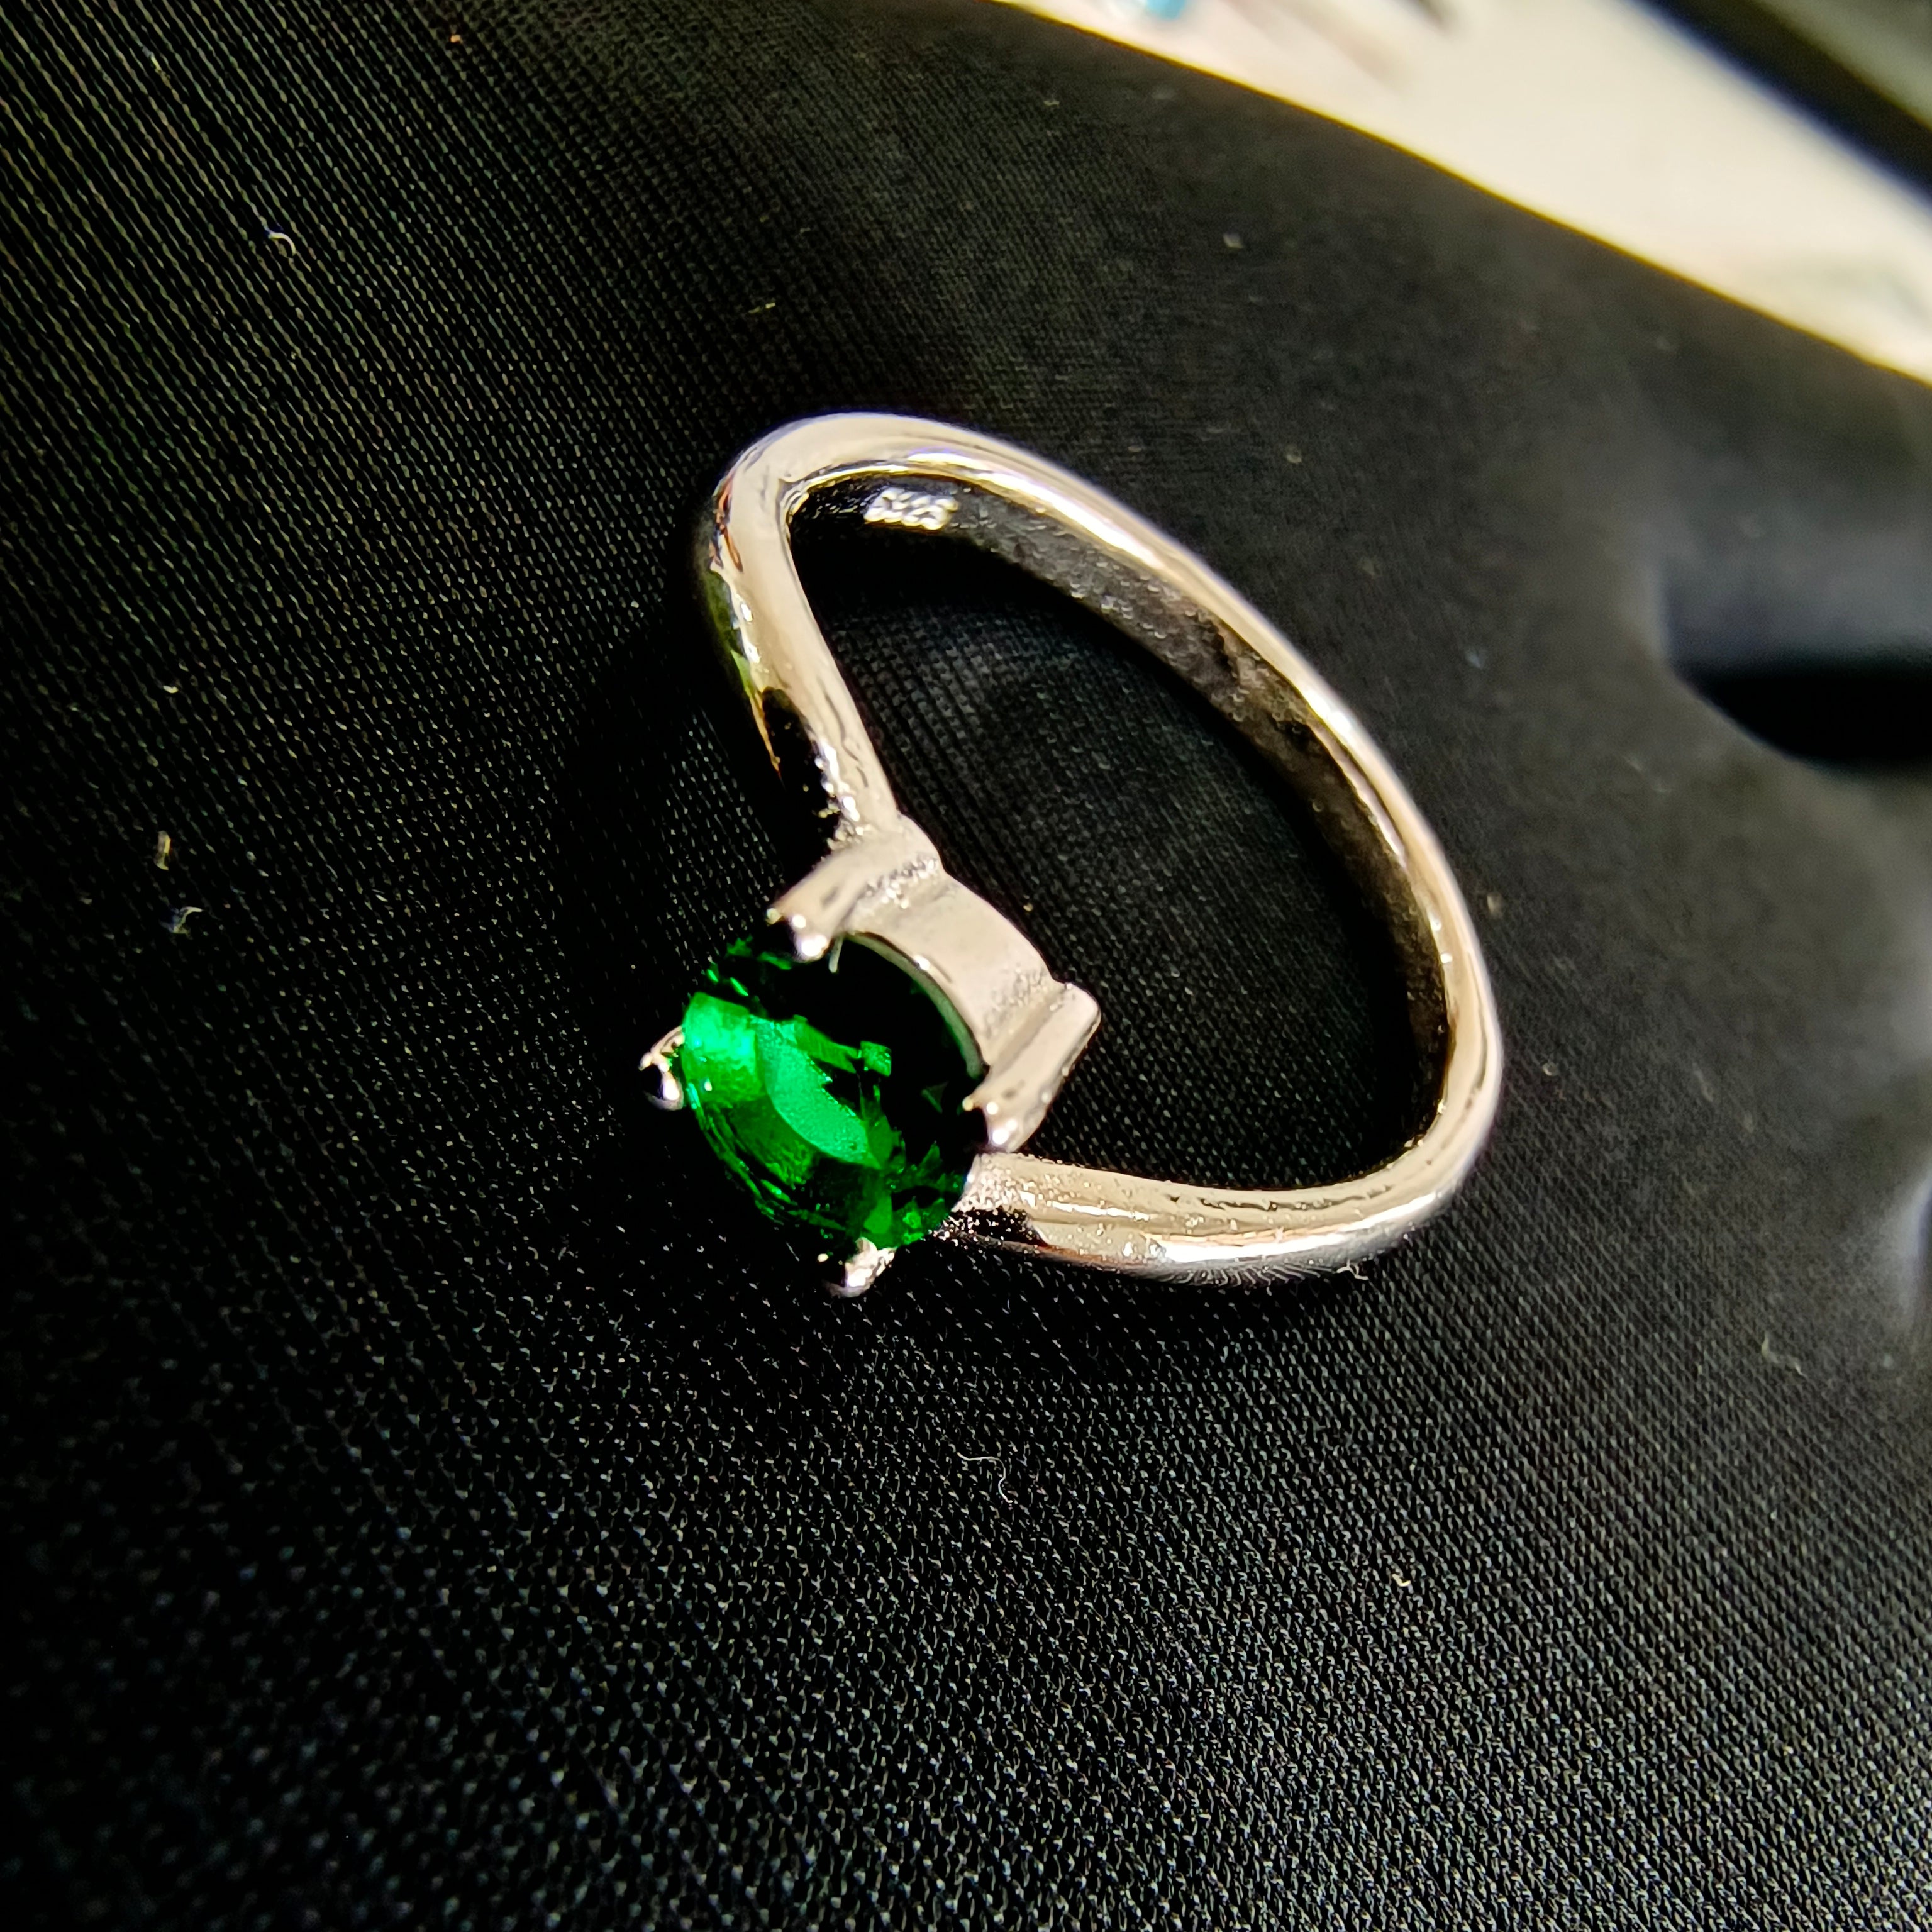 a close up of a ring with a green stone